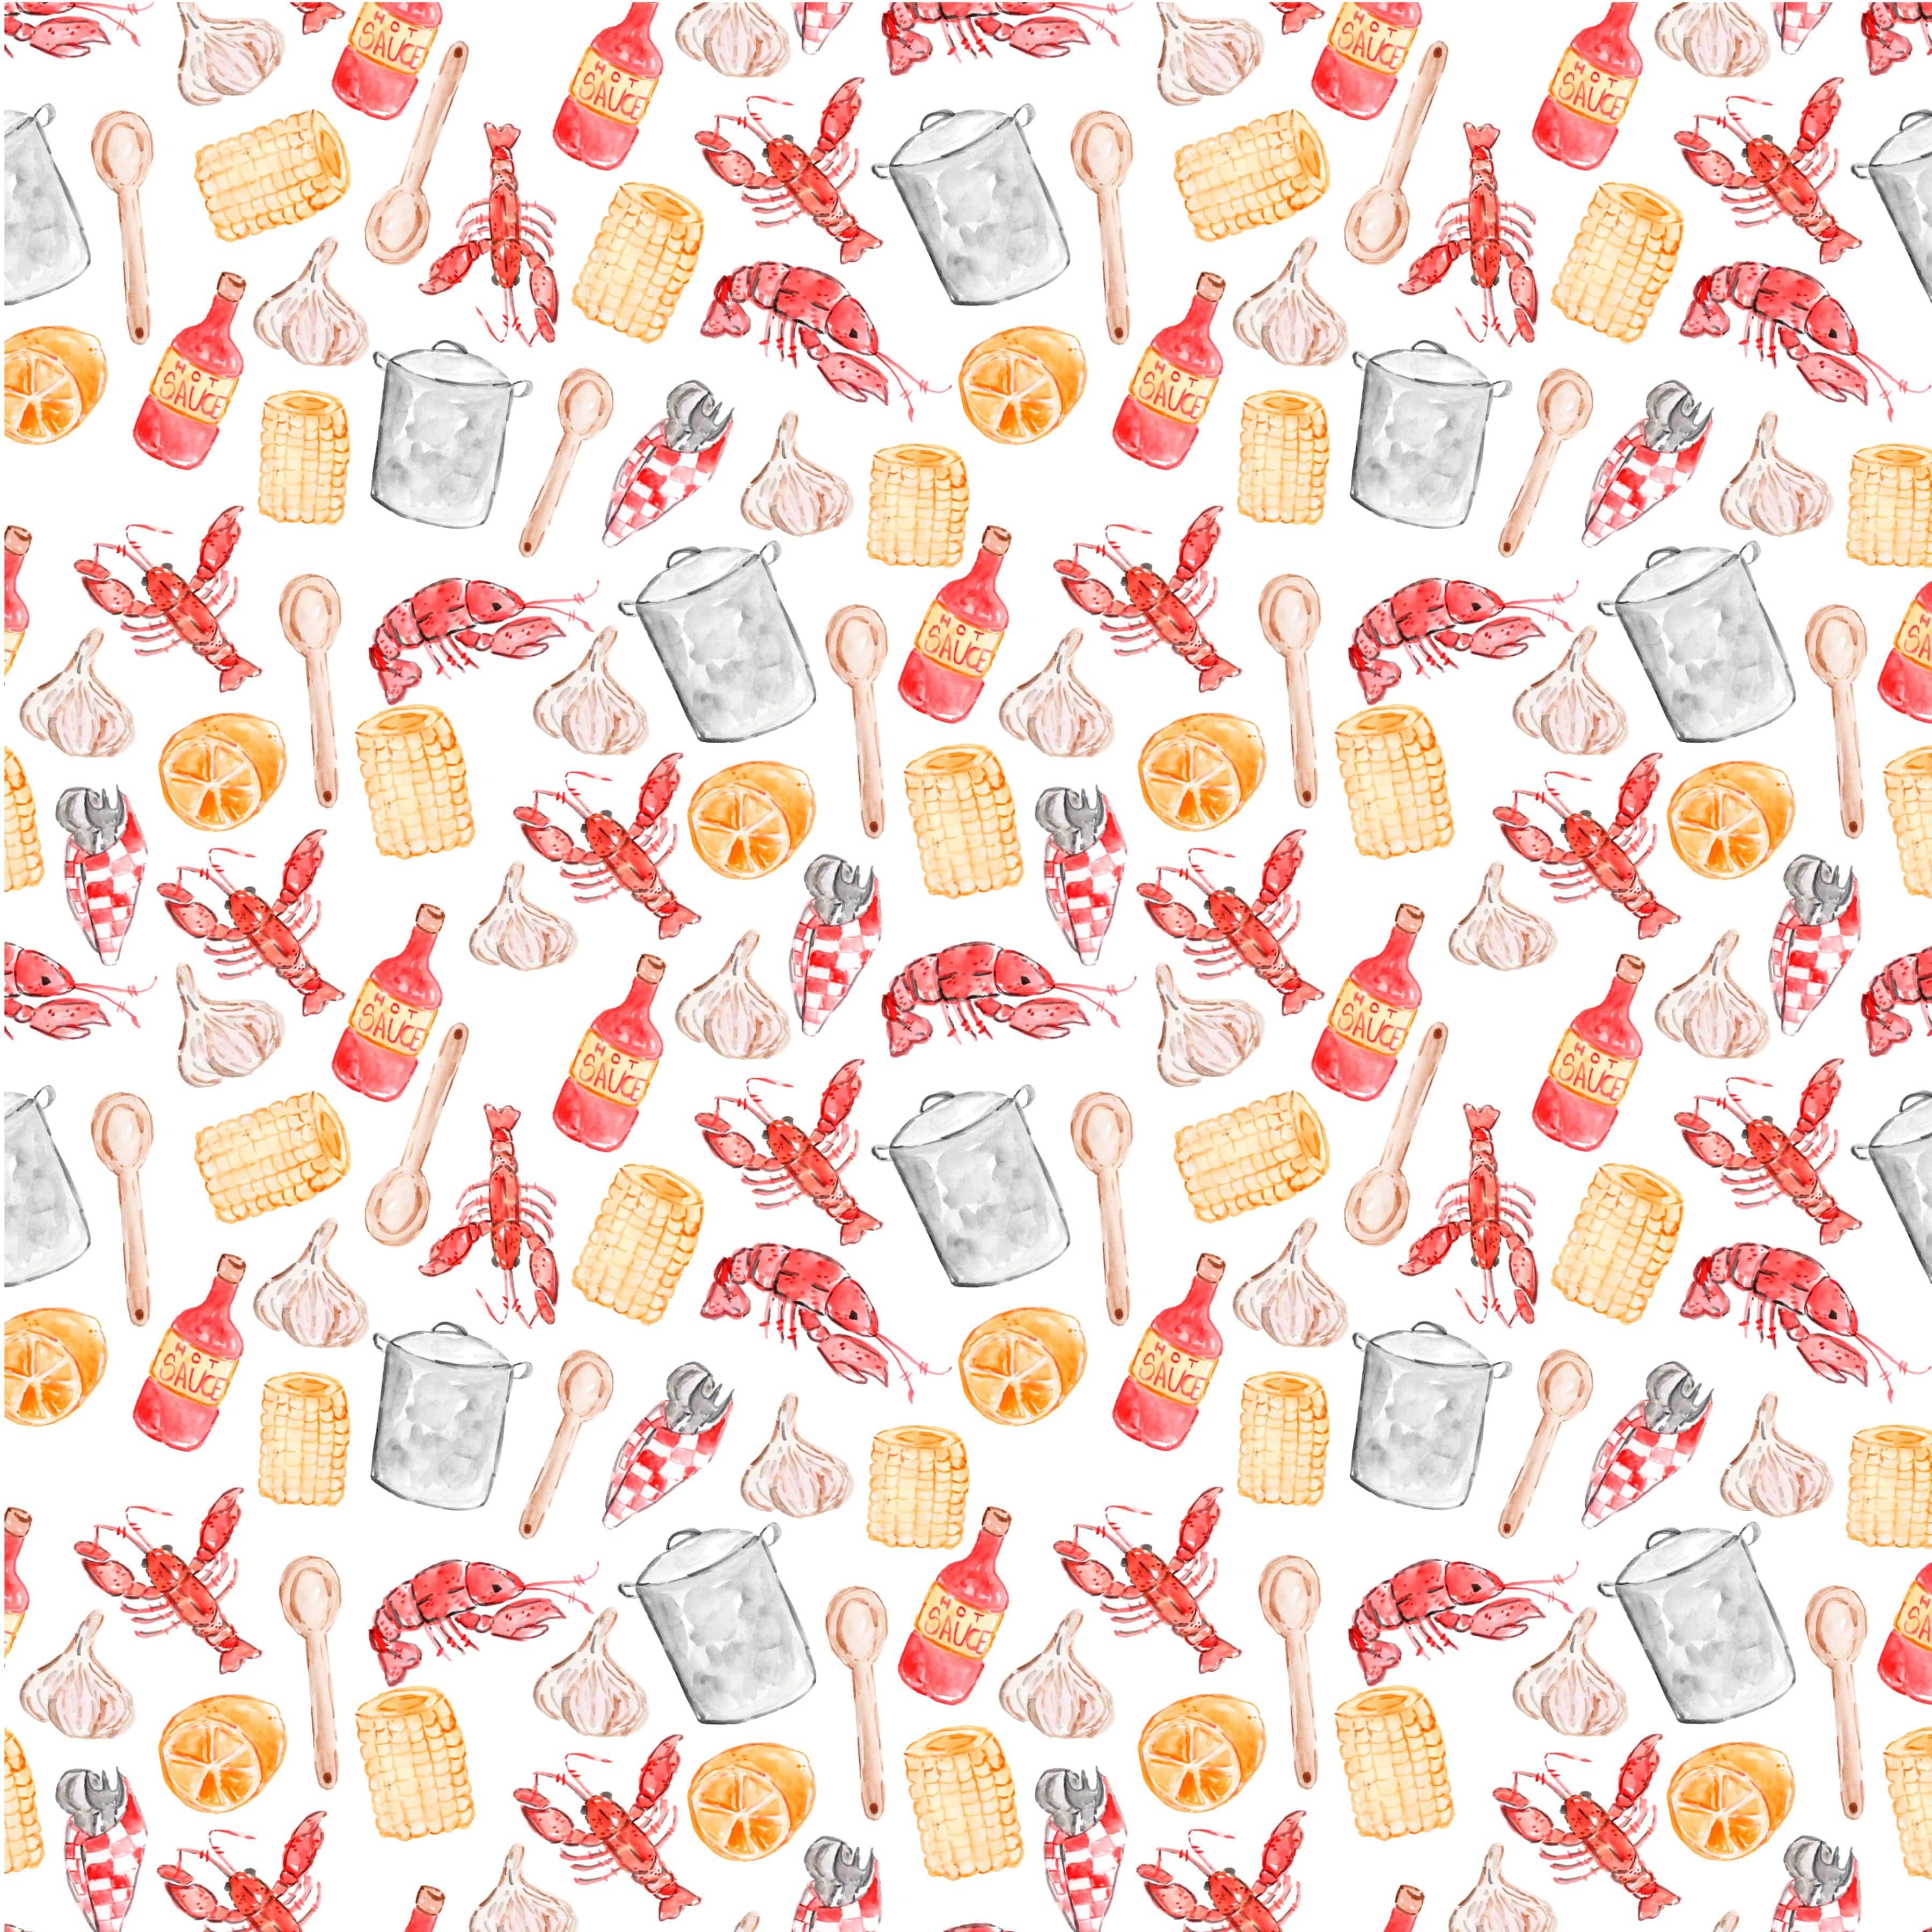 WriteLovely's Seafood Boil Collection Lobster, Crawfish, Shrimp, Oh My! 12 x 12 Double-Sided Scrapbook Paper by SSC Designs - Scrapbook Supply Companies